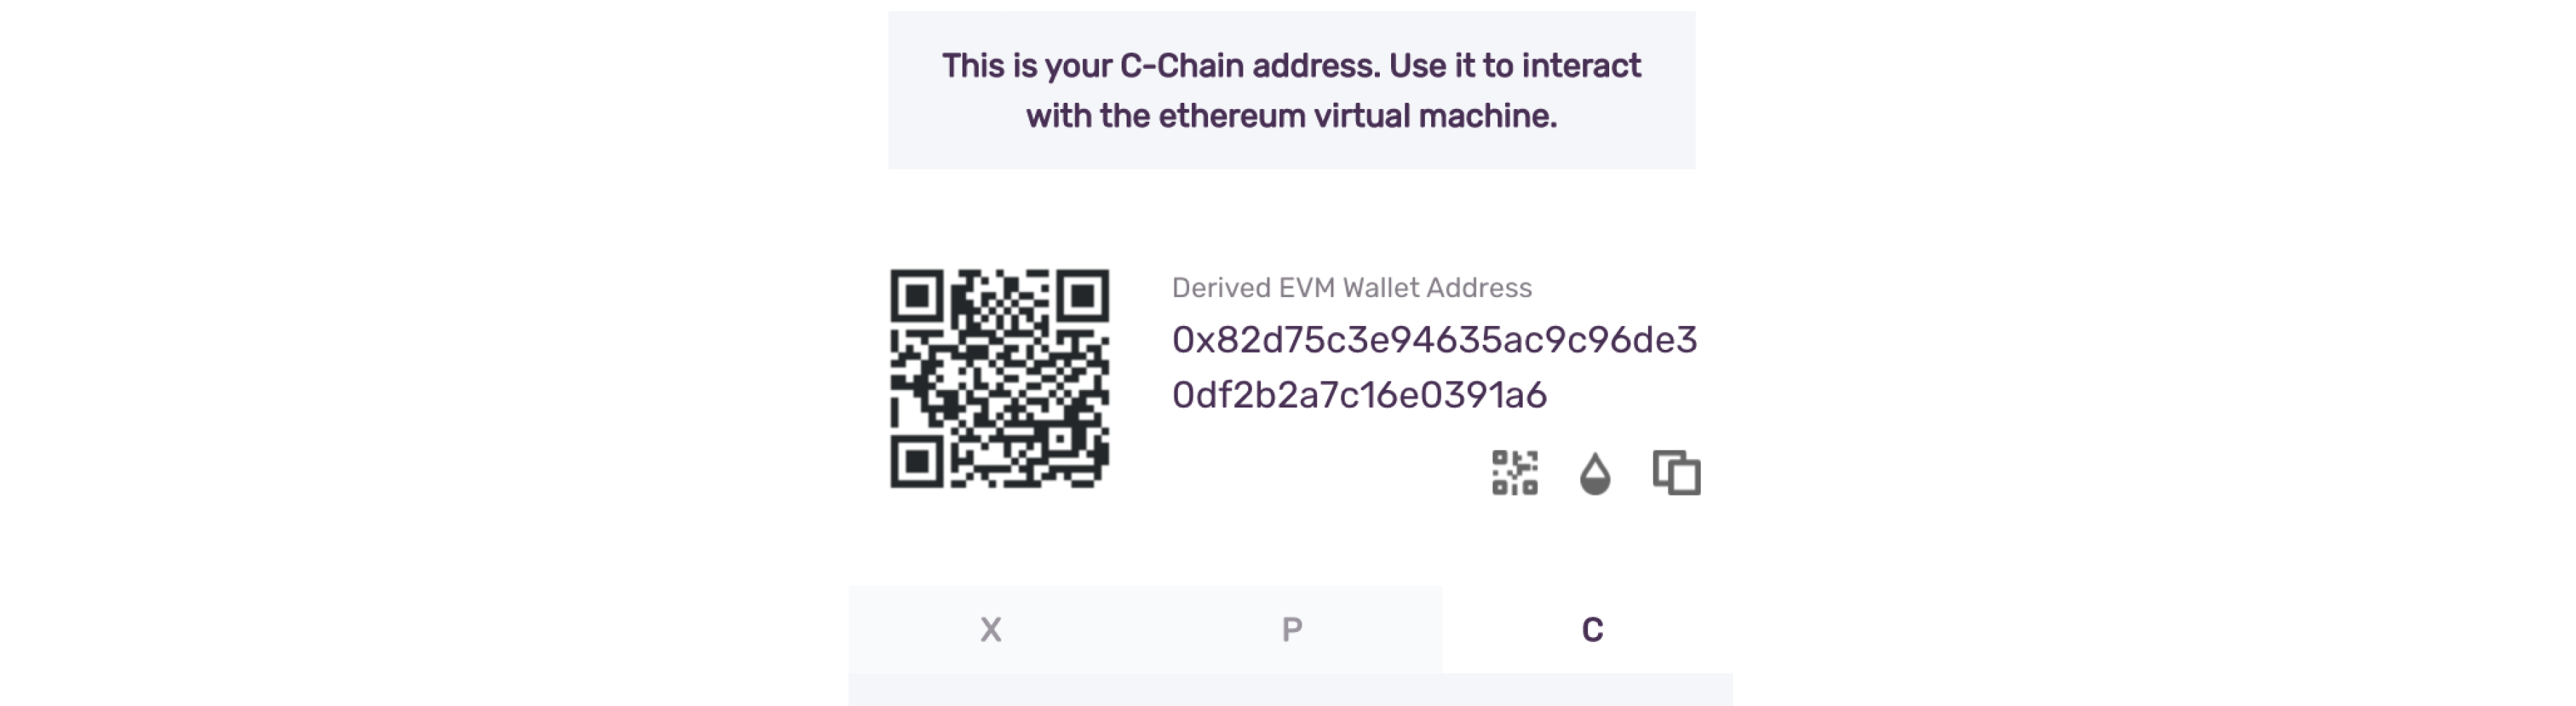 Avalanche wallet transforms your address into EVM compatible format